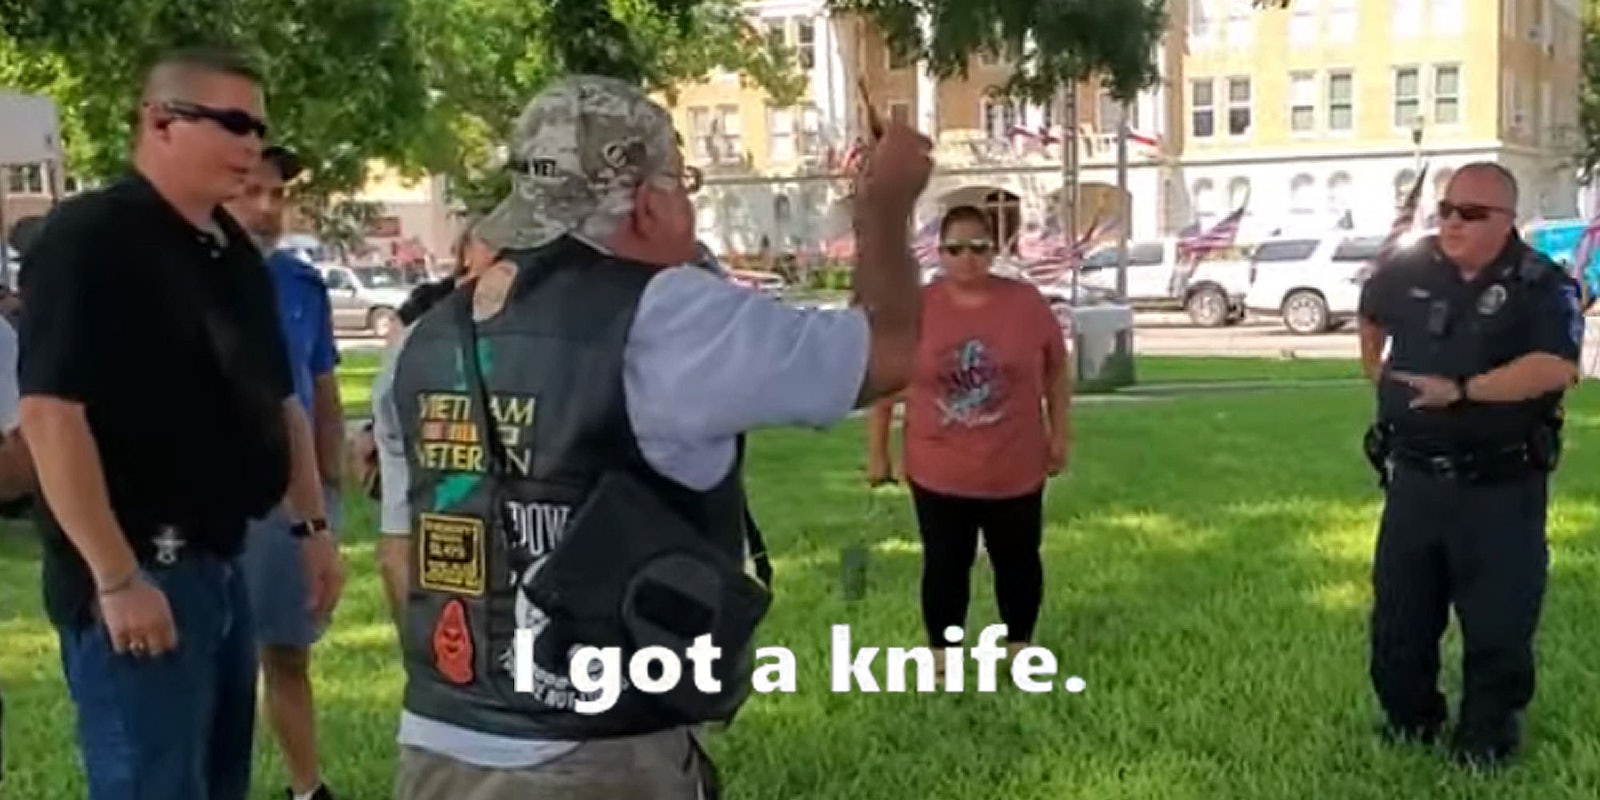 Vietnam vet grandpa holding out knife in group with police outside caption 'I got a knife.'